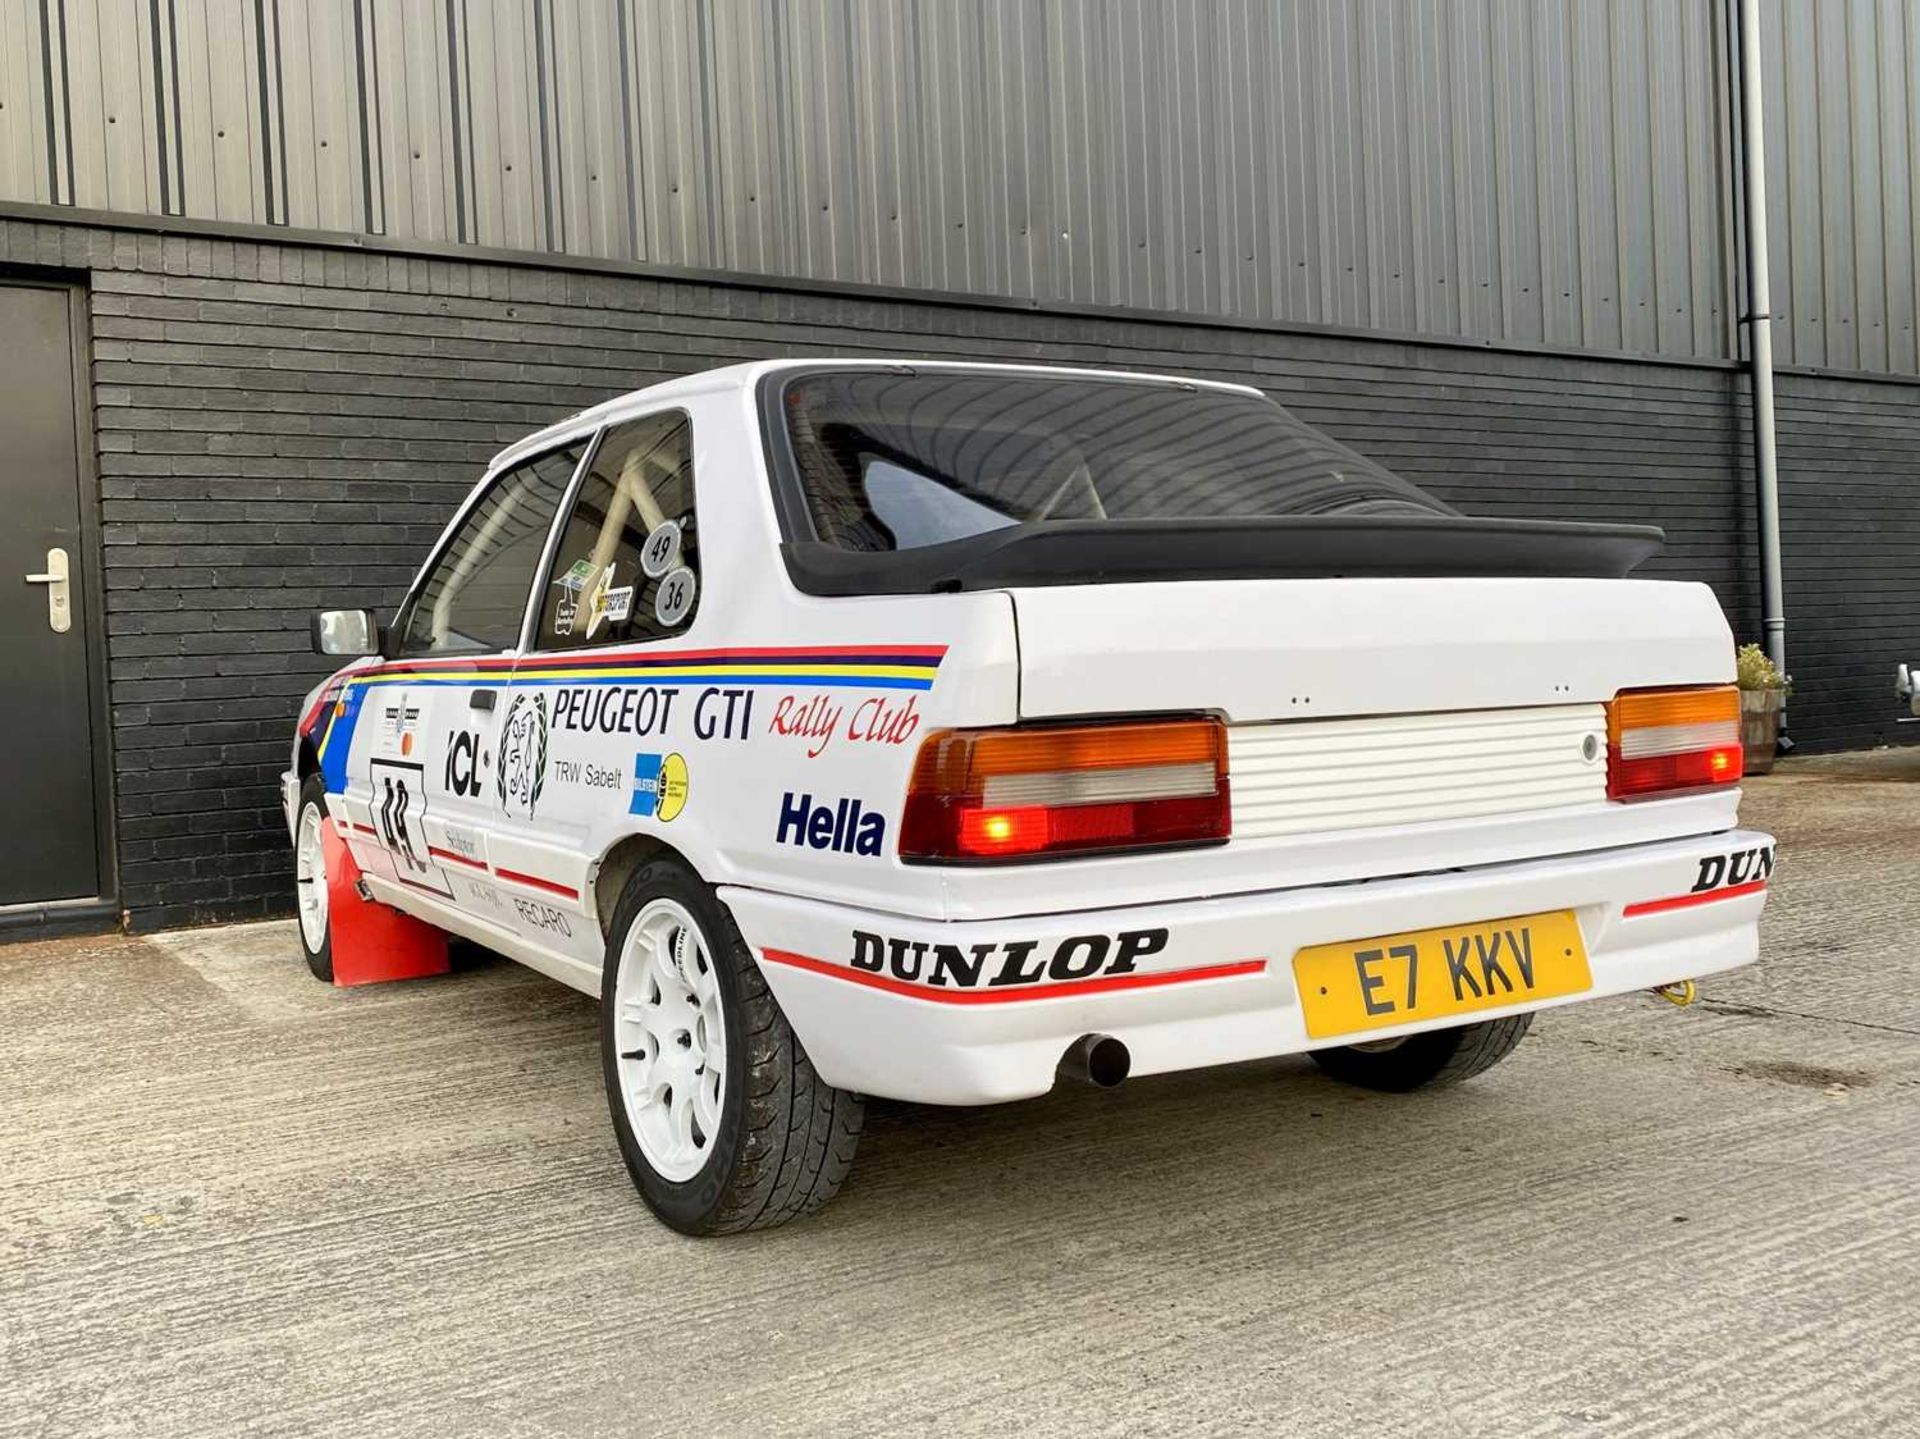 1987 Peugeot 309 GTi Group N Rally Car FIA paperwork and a previous entrant at the Goodwood Festival - Image 11 of 50